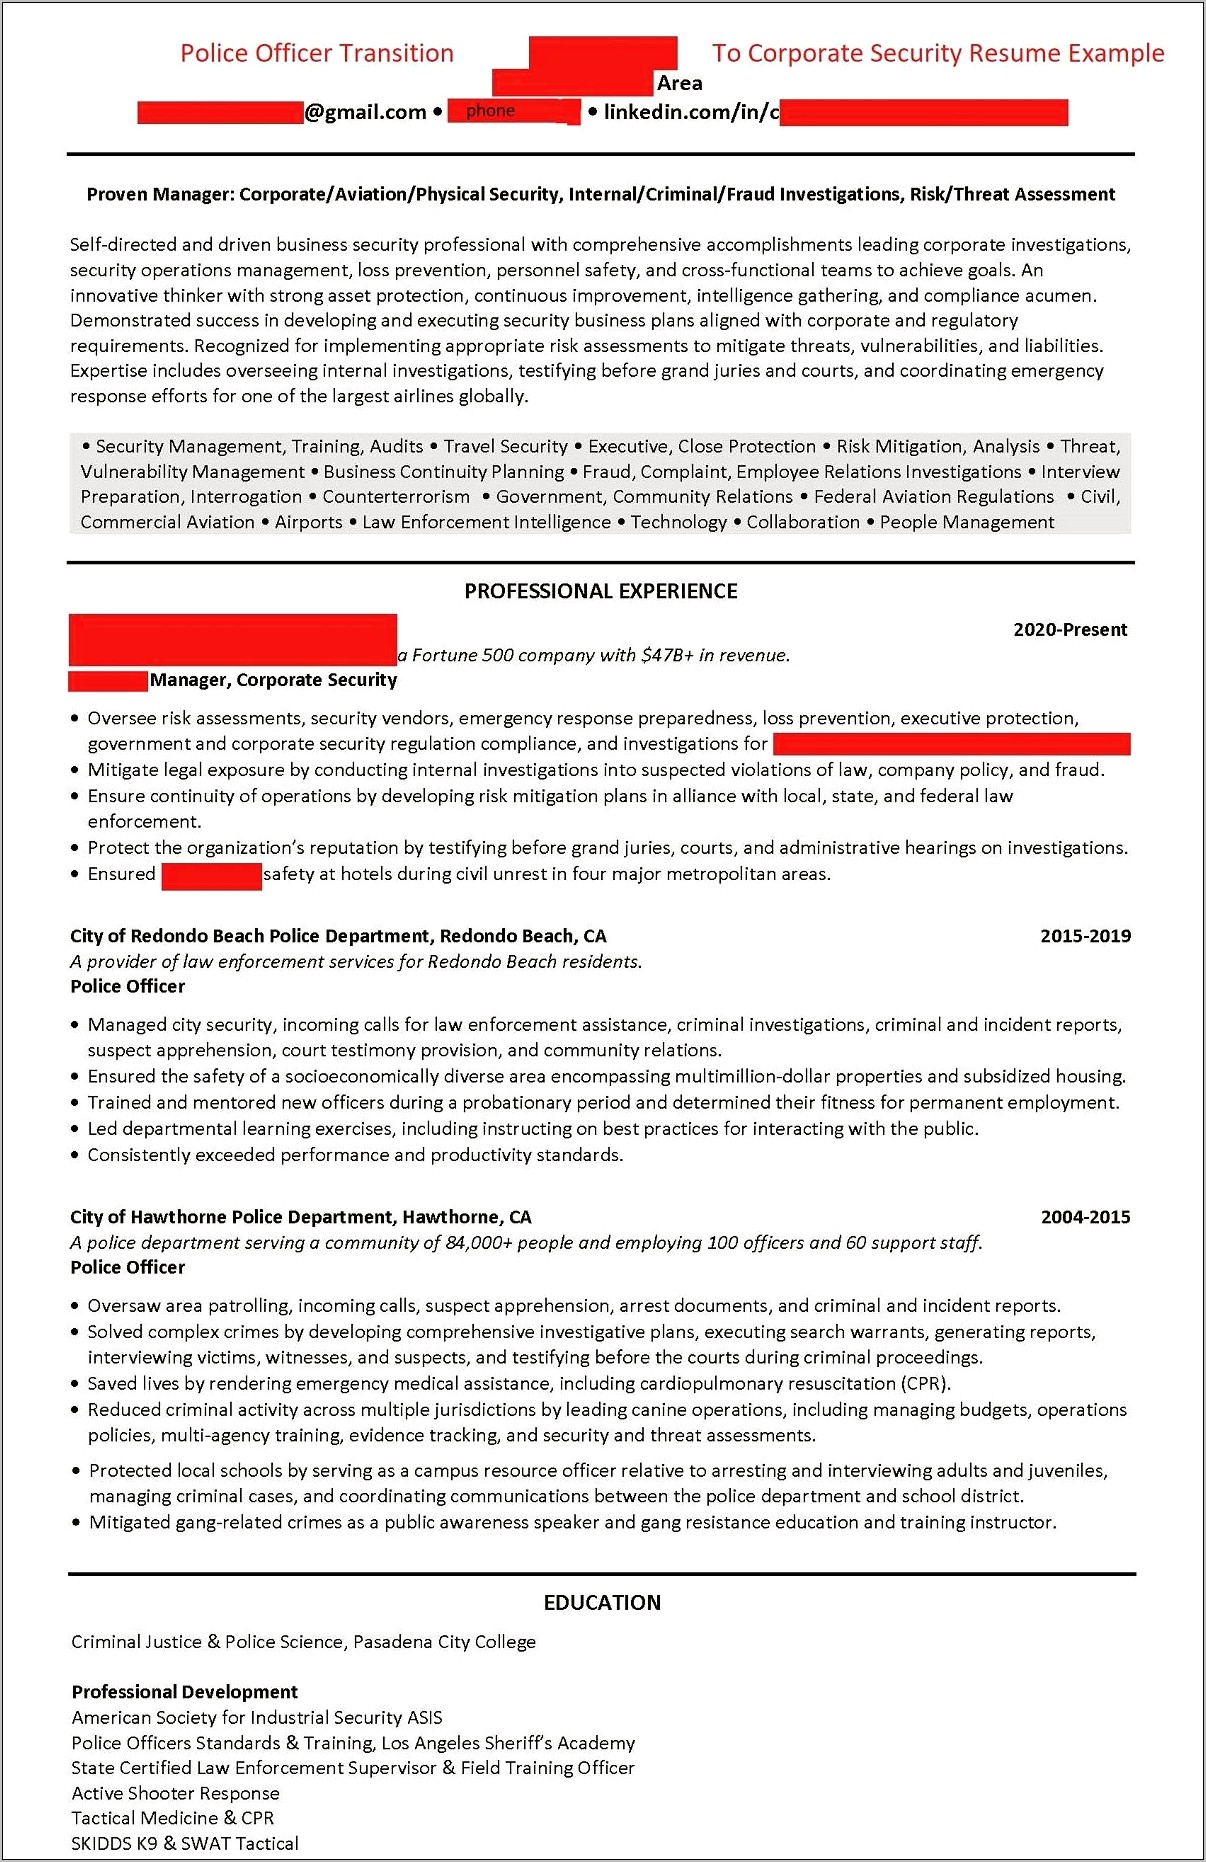 Resume Objective For Police Detective